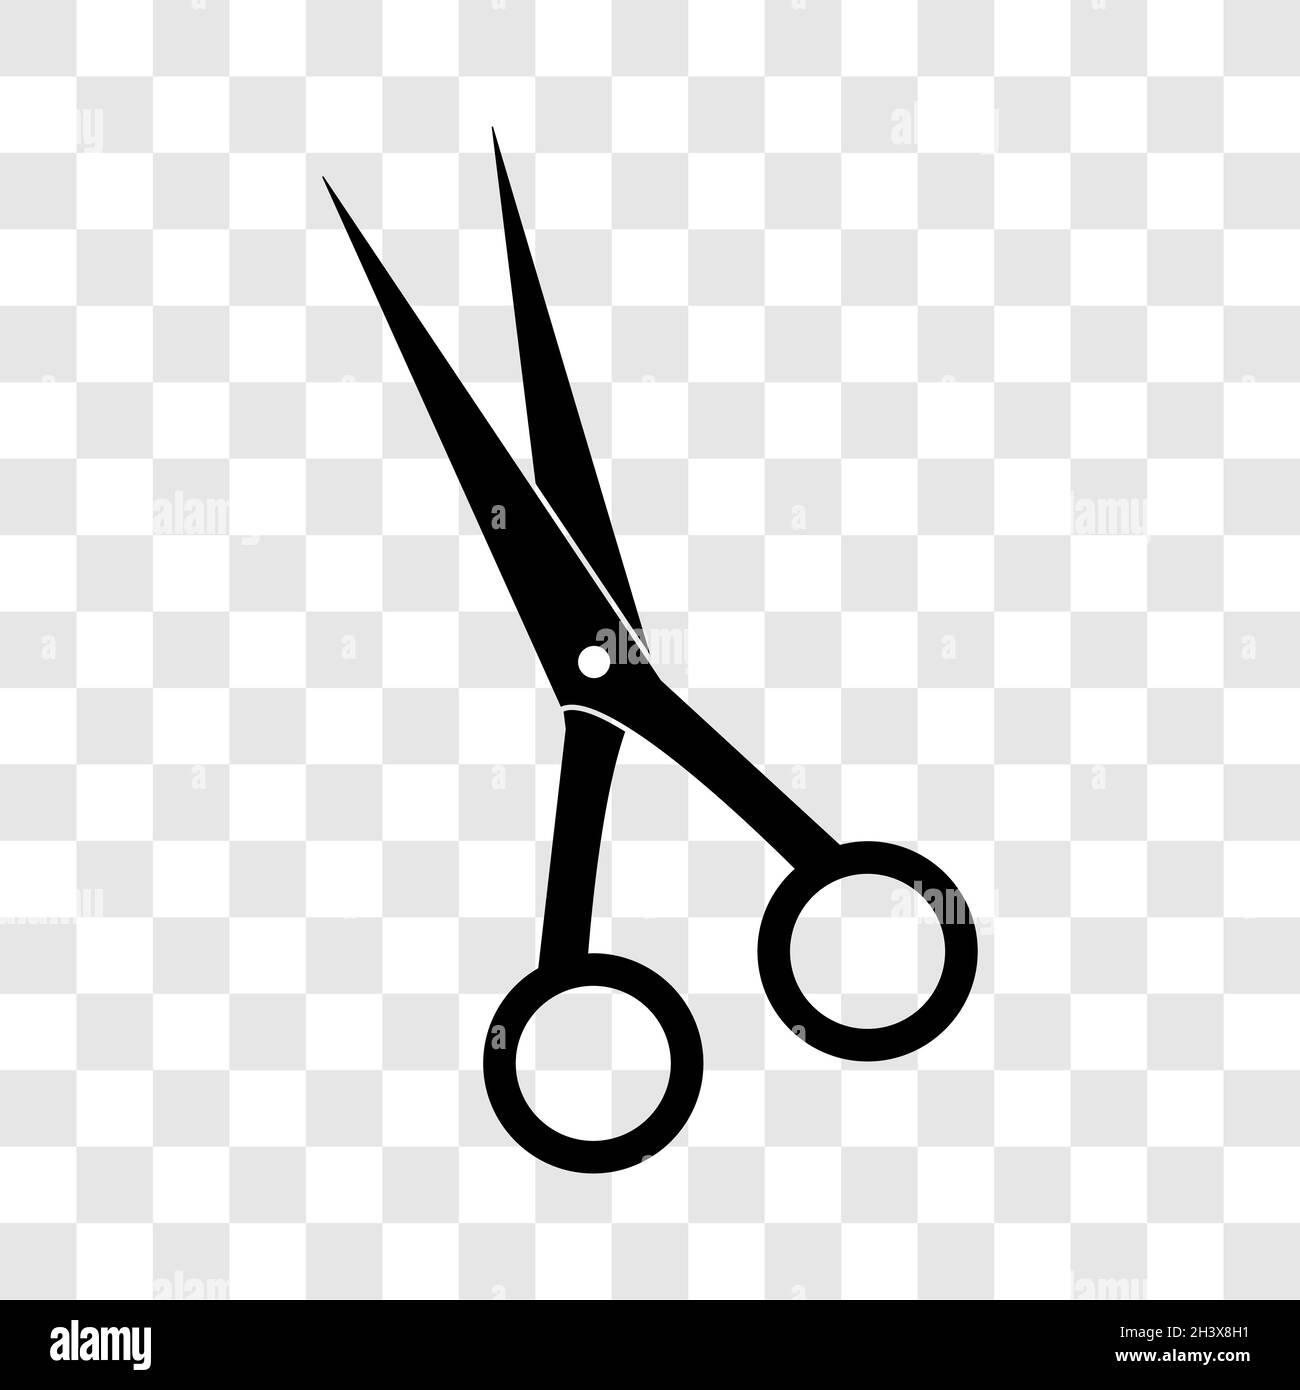 Scissors icon barber shop or tailor equipment symbol. Vector illustration isolated on transparent background. Stock Vector